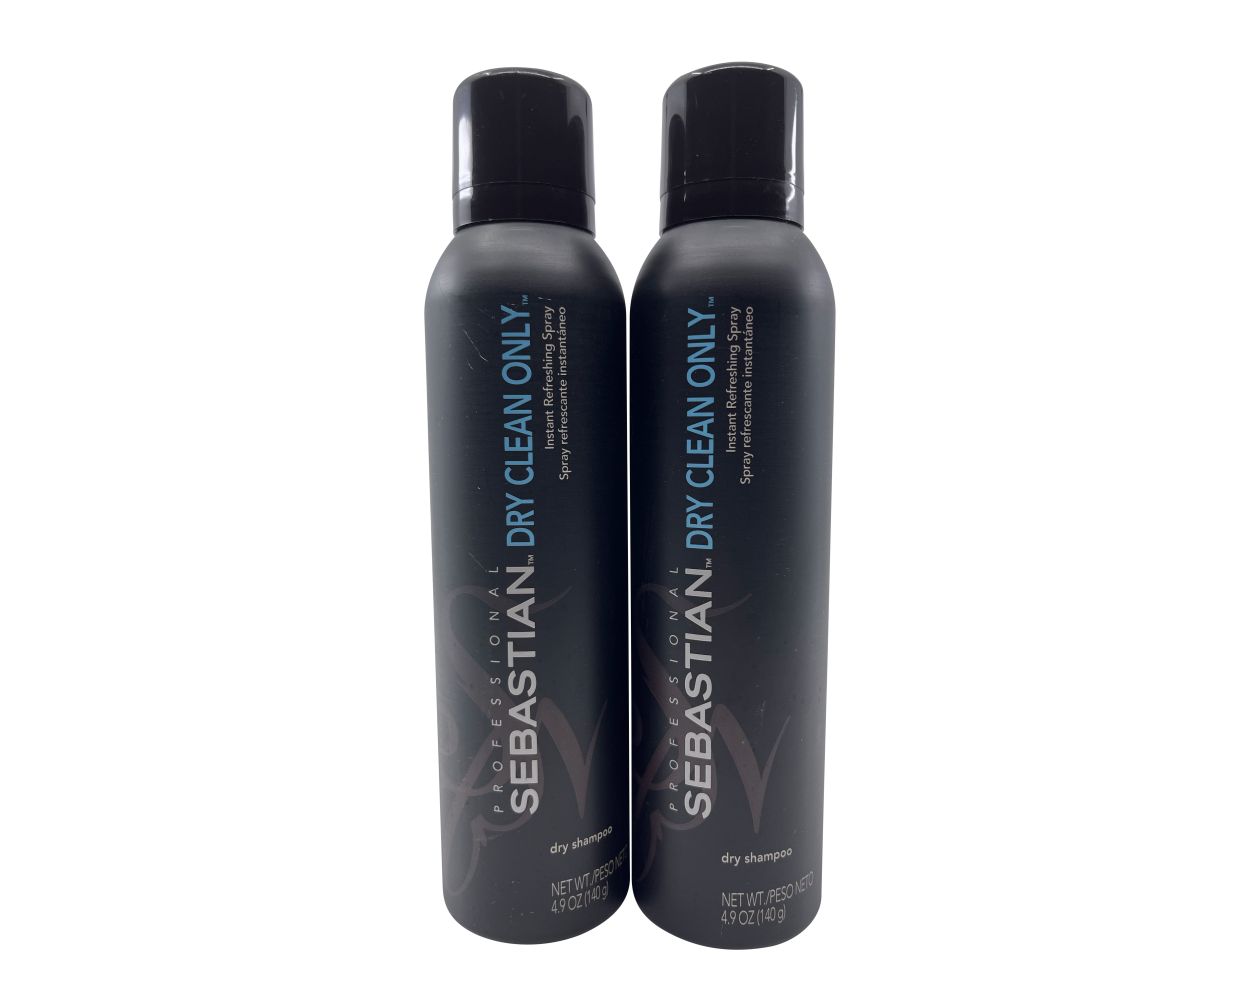 uitlijning Dominant zweer Sebastian Professional Dry Clean Only Instant Refreshing Spray Dry Shampoo  Set of 2 | Shampoo - Beautyvice.com